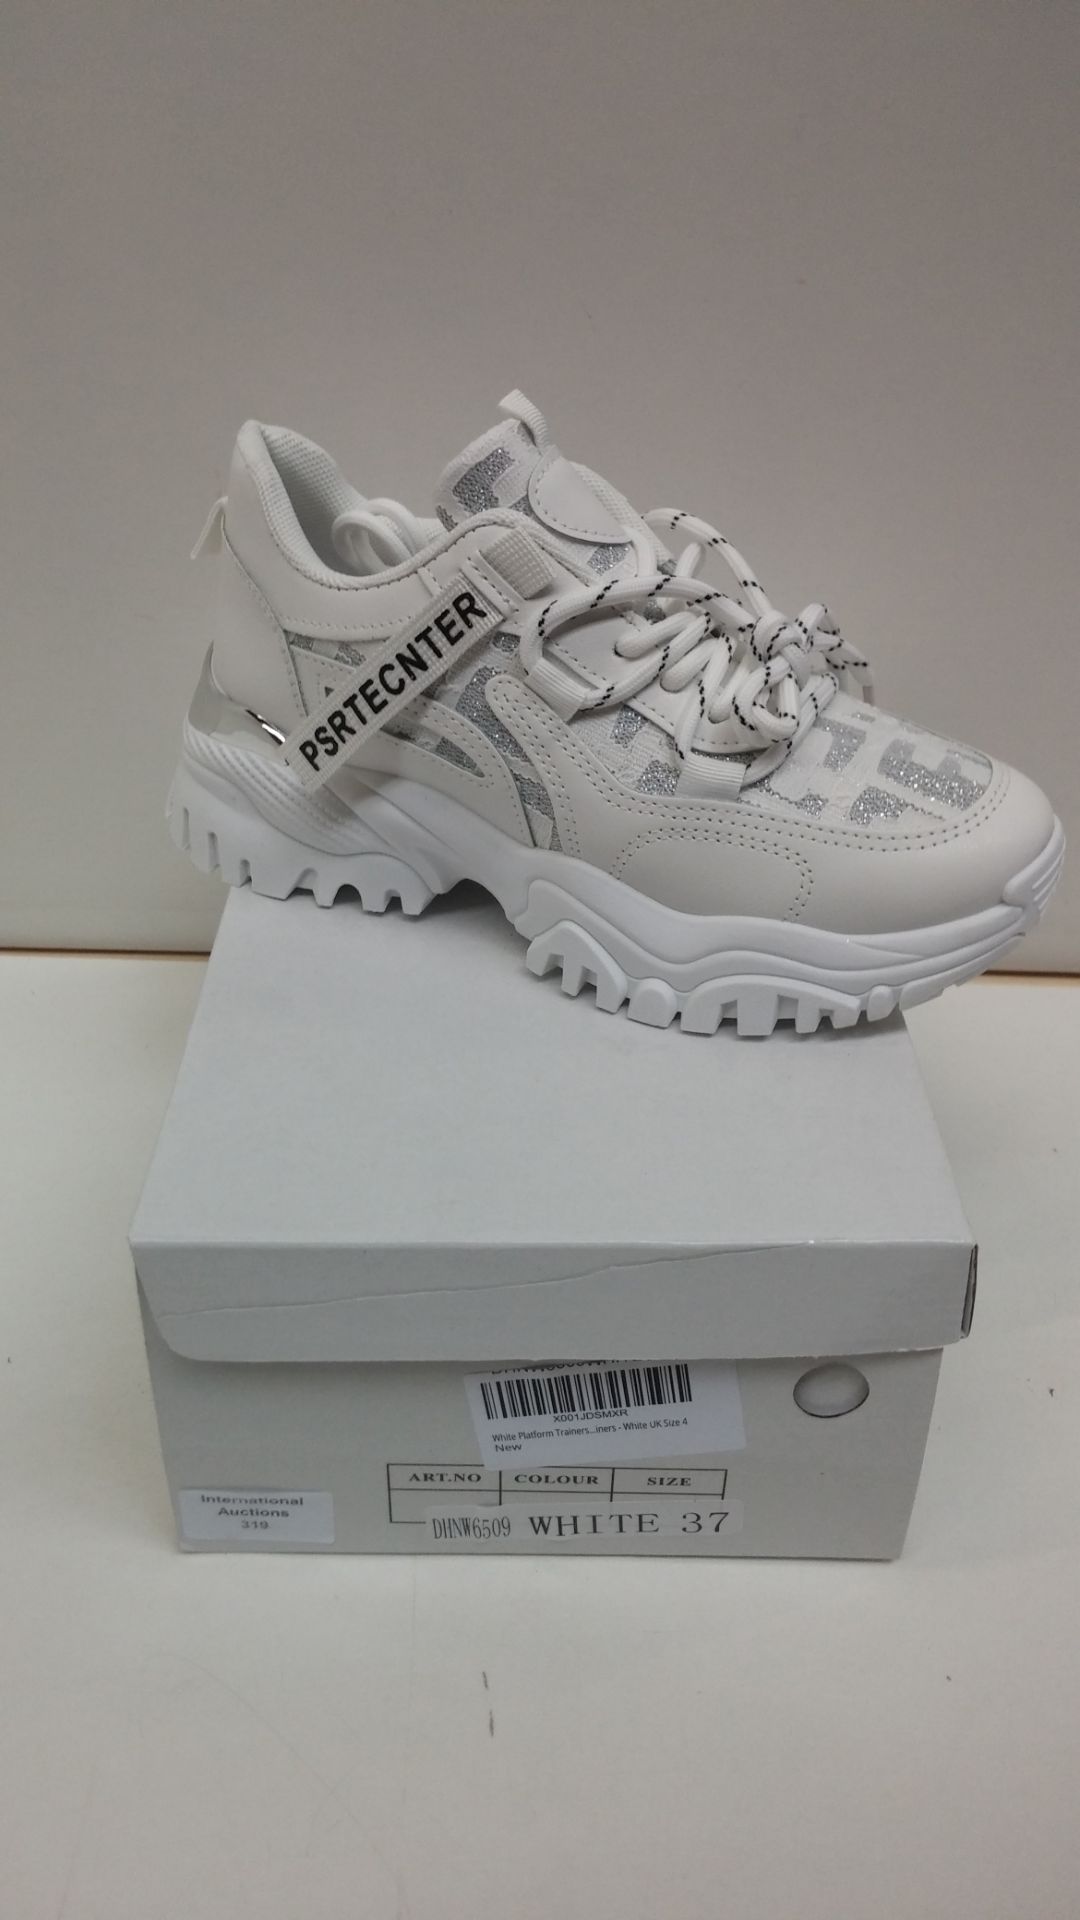 RRP £32.99 White Platform Trainers for Women - White Chunky Trainers for Women Size 4 New - Image 2 of 2